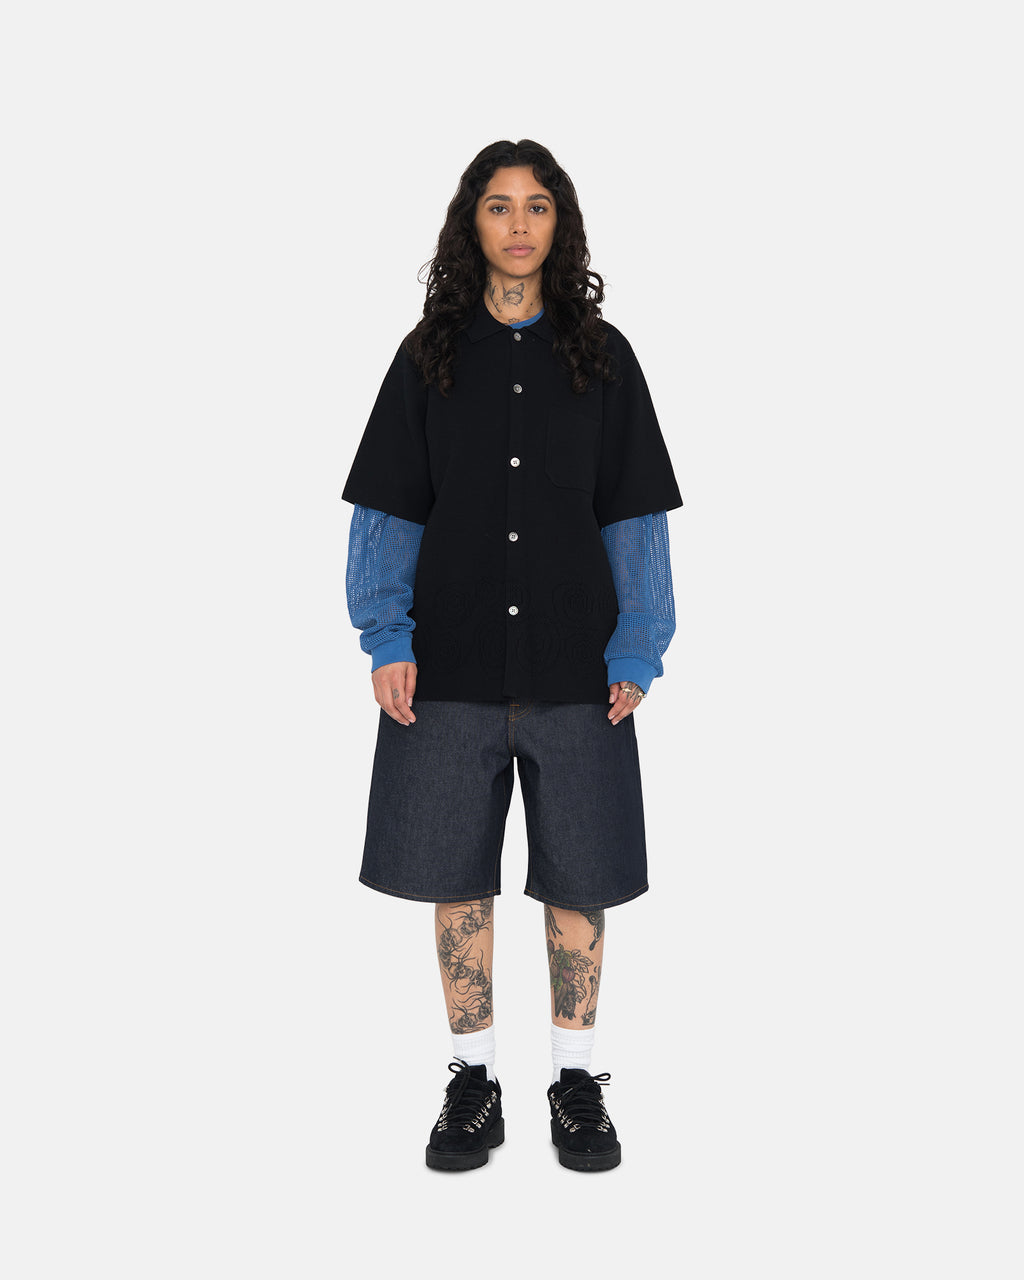 Stussy Tops & Shirts Wholesale - Black Wrinkly Gingham Ss Shirt